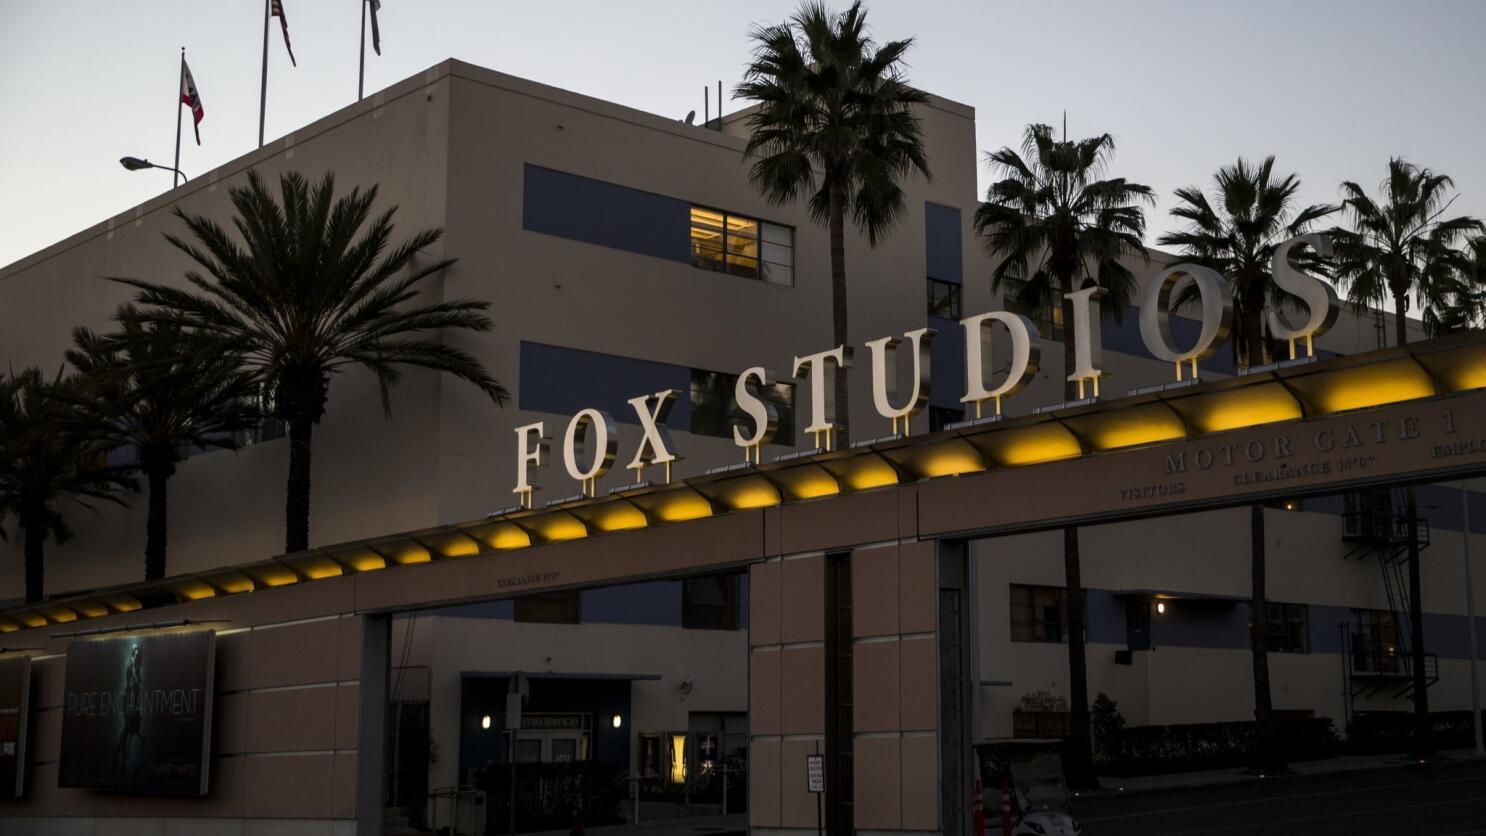 20th Century Fox Breaks Ground on First Movie Theme Park, in Malaysia